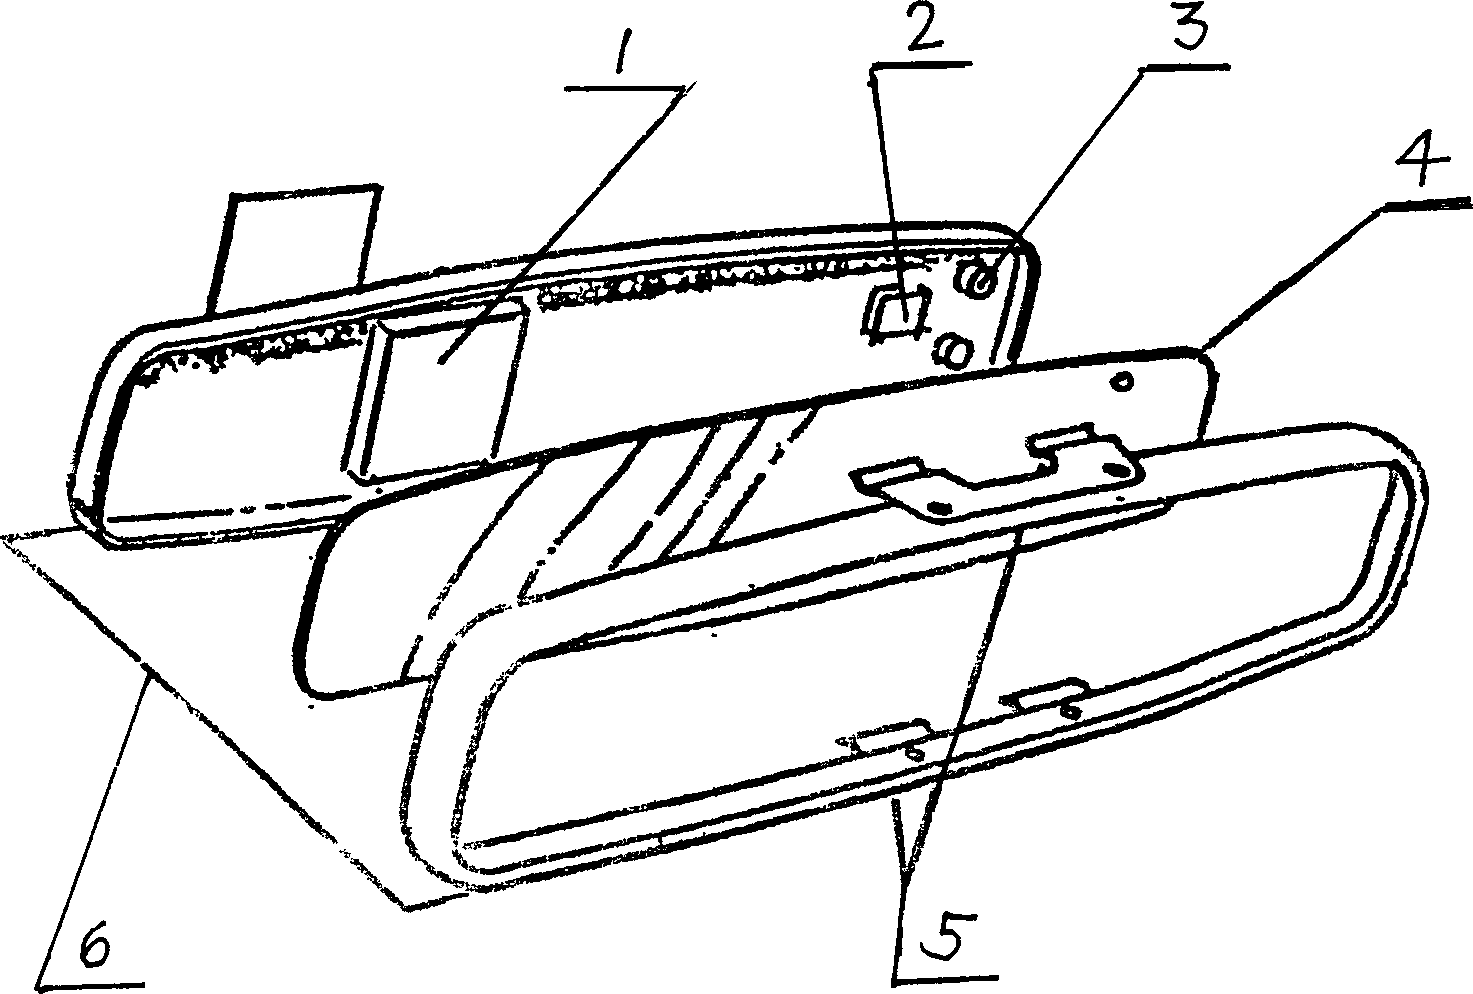 Rearview mirror with light being adjusted by liquid crystal display automatically